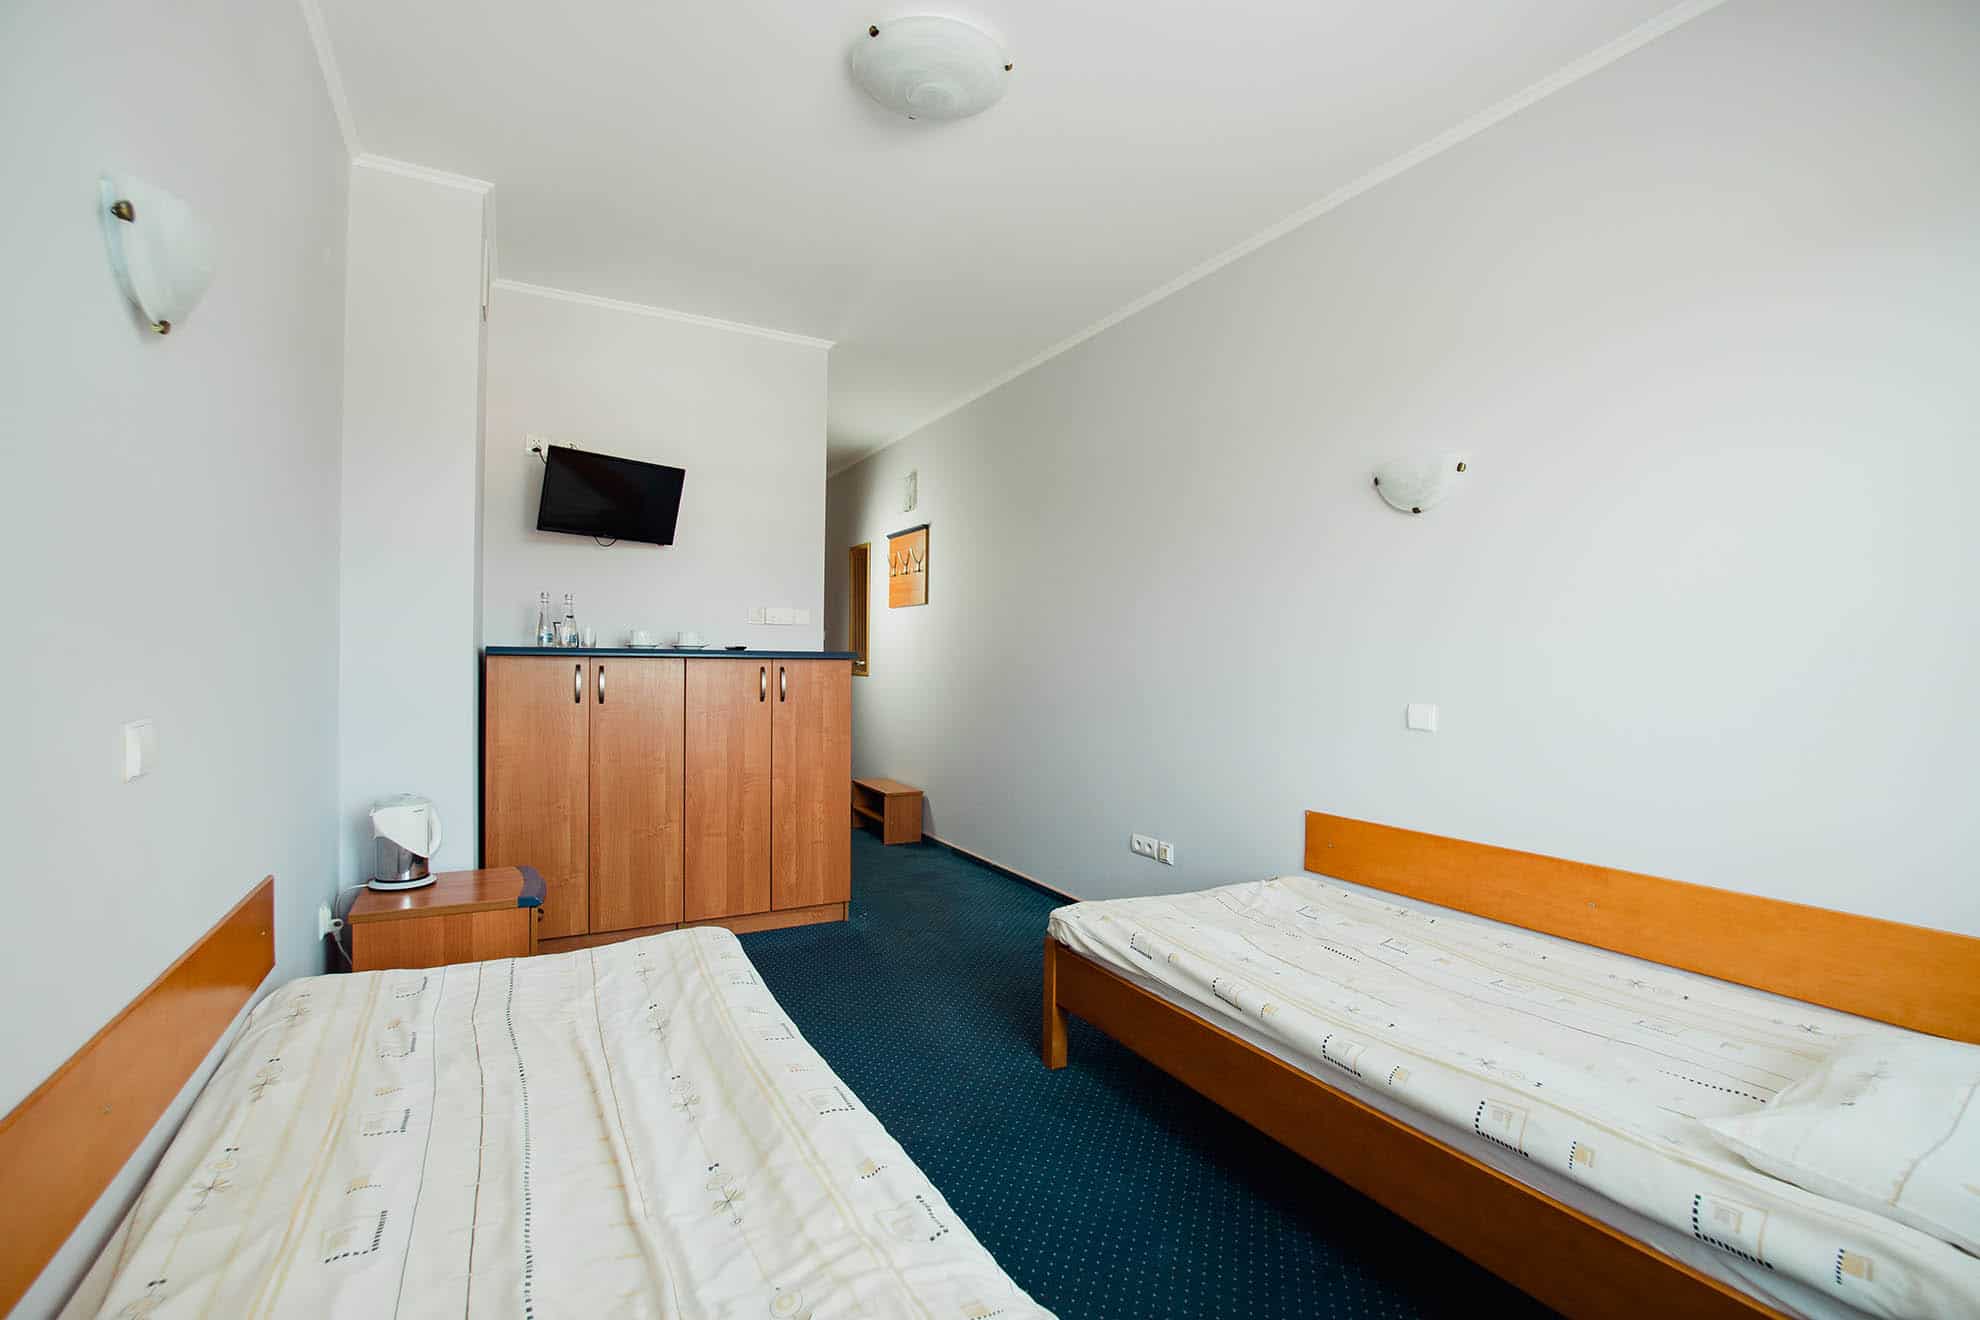 ROOMS Krosno accommodation in the city center, rest in Poland 05